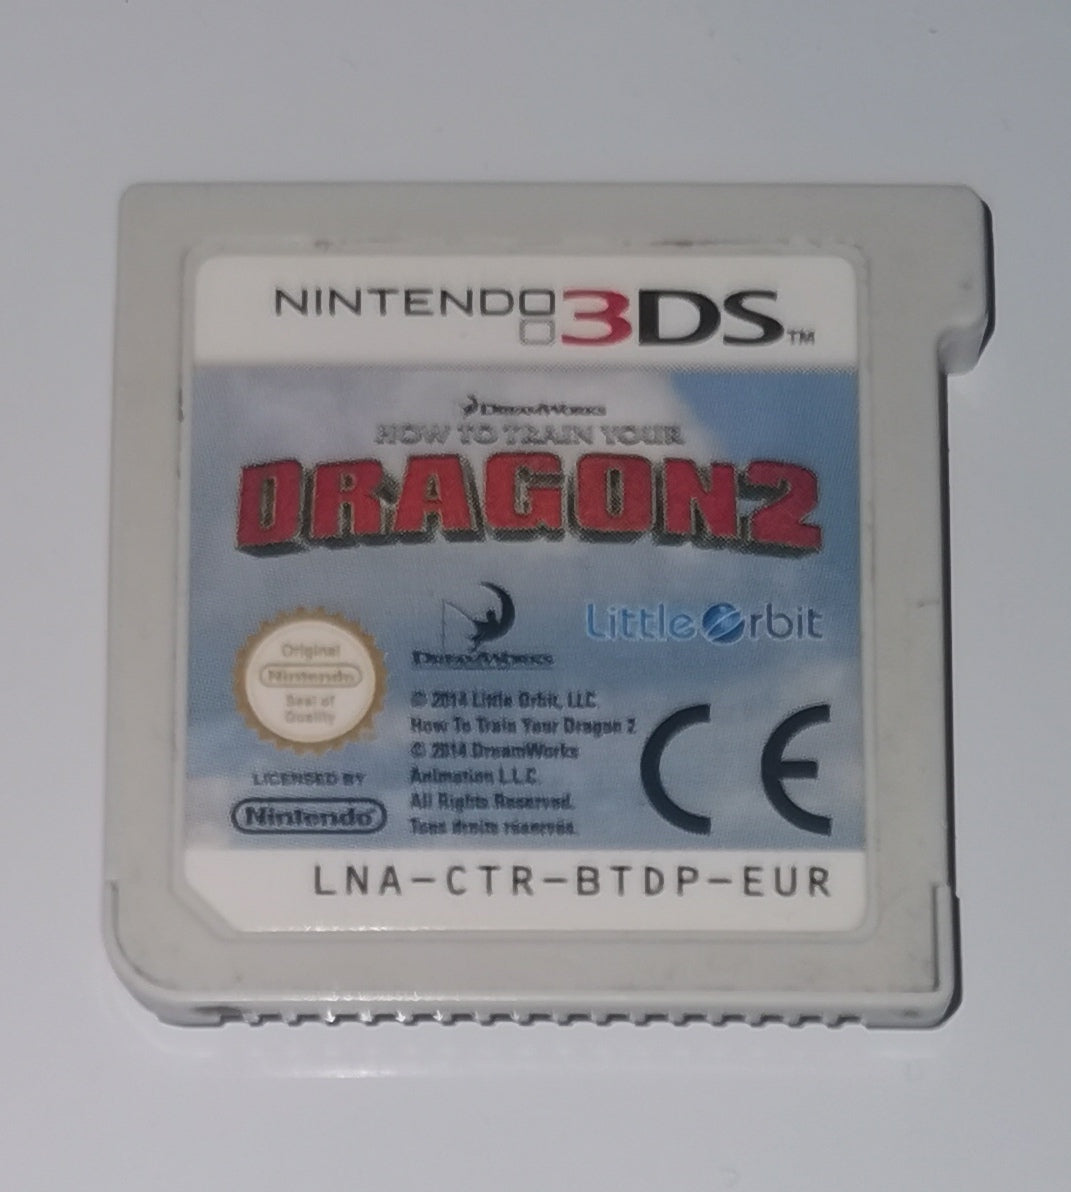 HOW TO TRAIN YOUR DRAGON 2 3DS FR (Nintendo 3DS) [Sehr Gut]